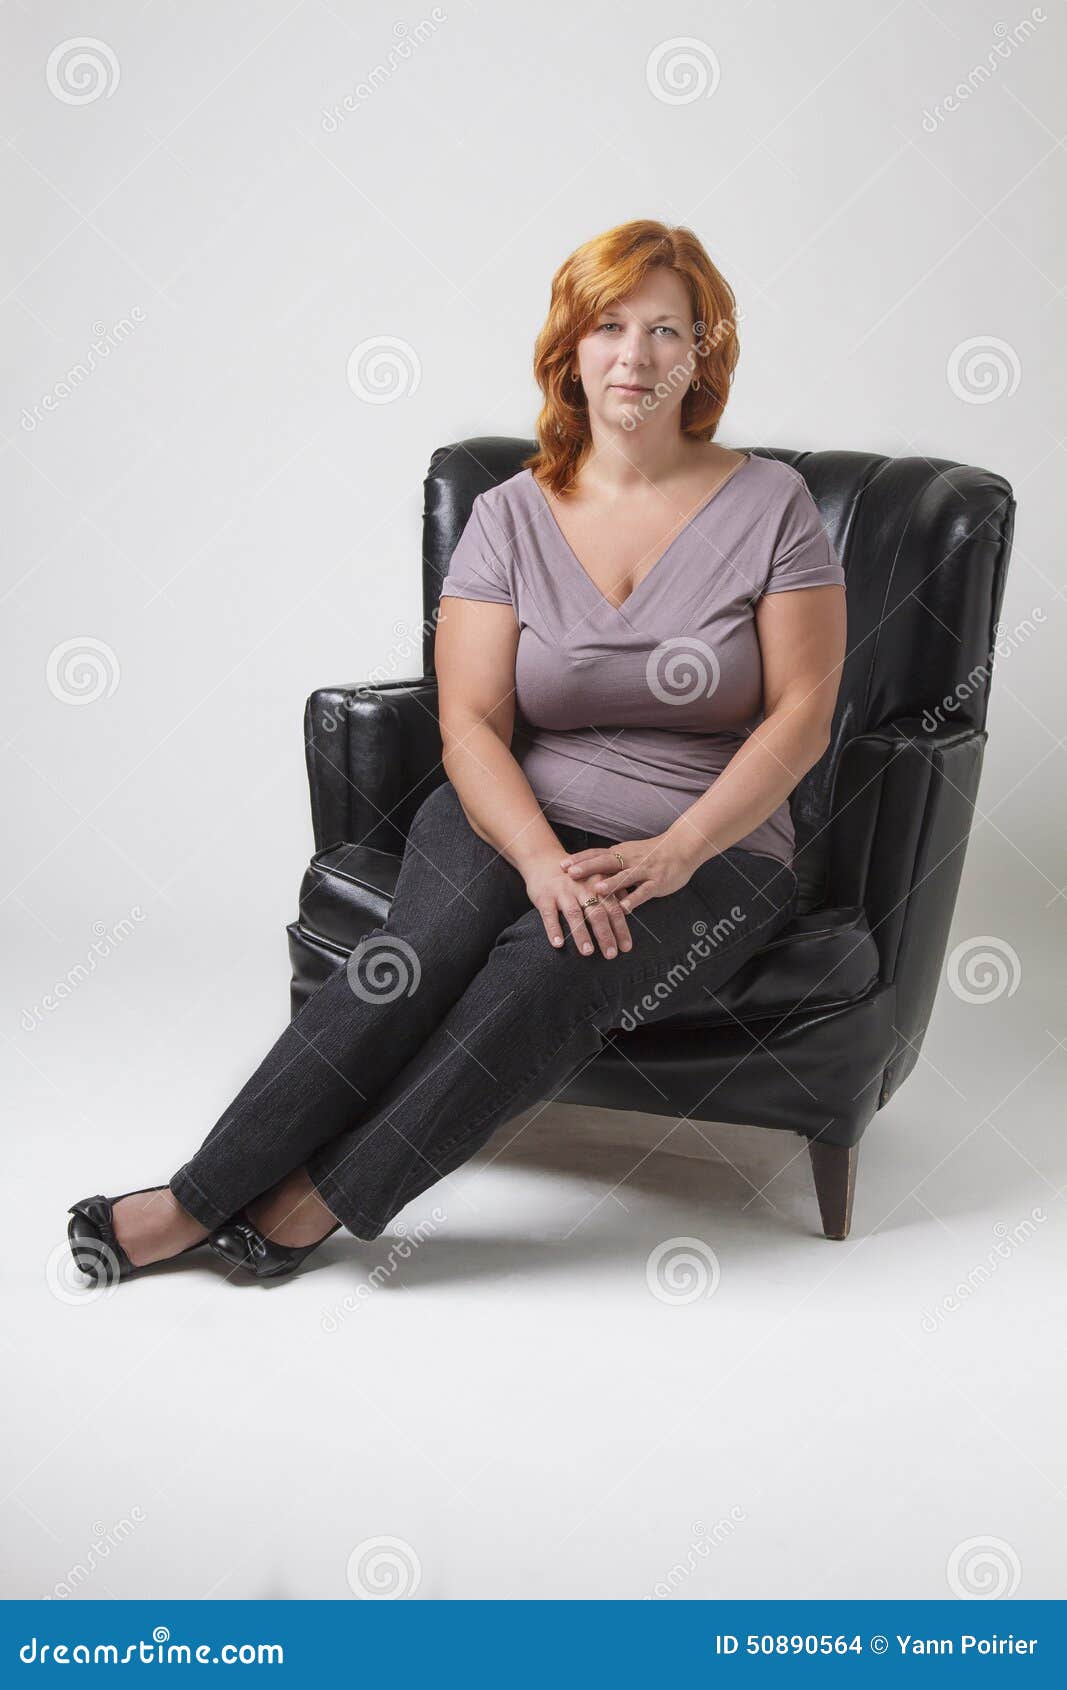 Mature woman stock photo. Image of cheerful, couch, beauty - 50890564